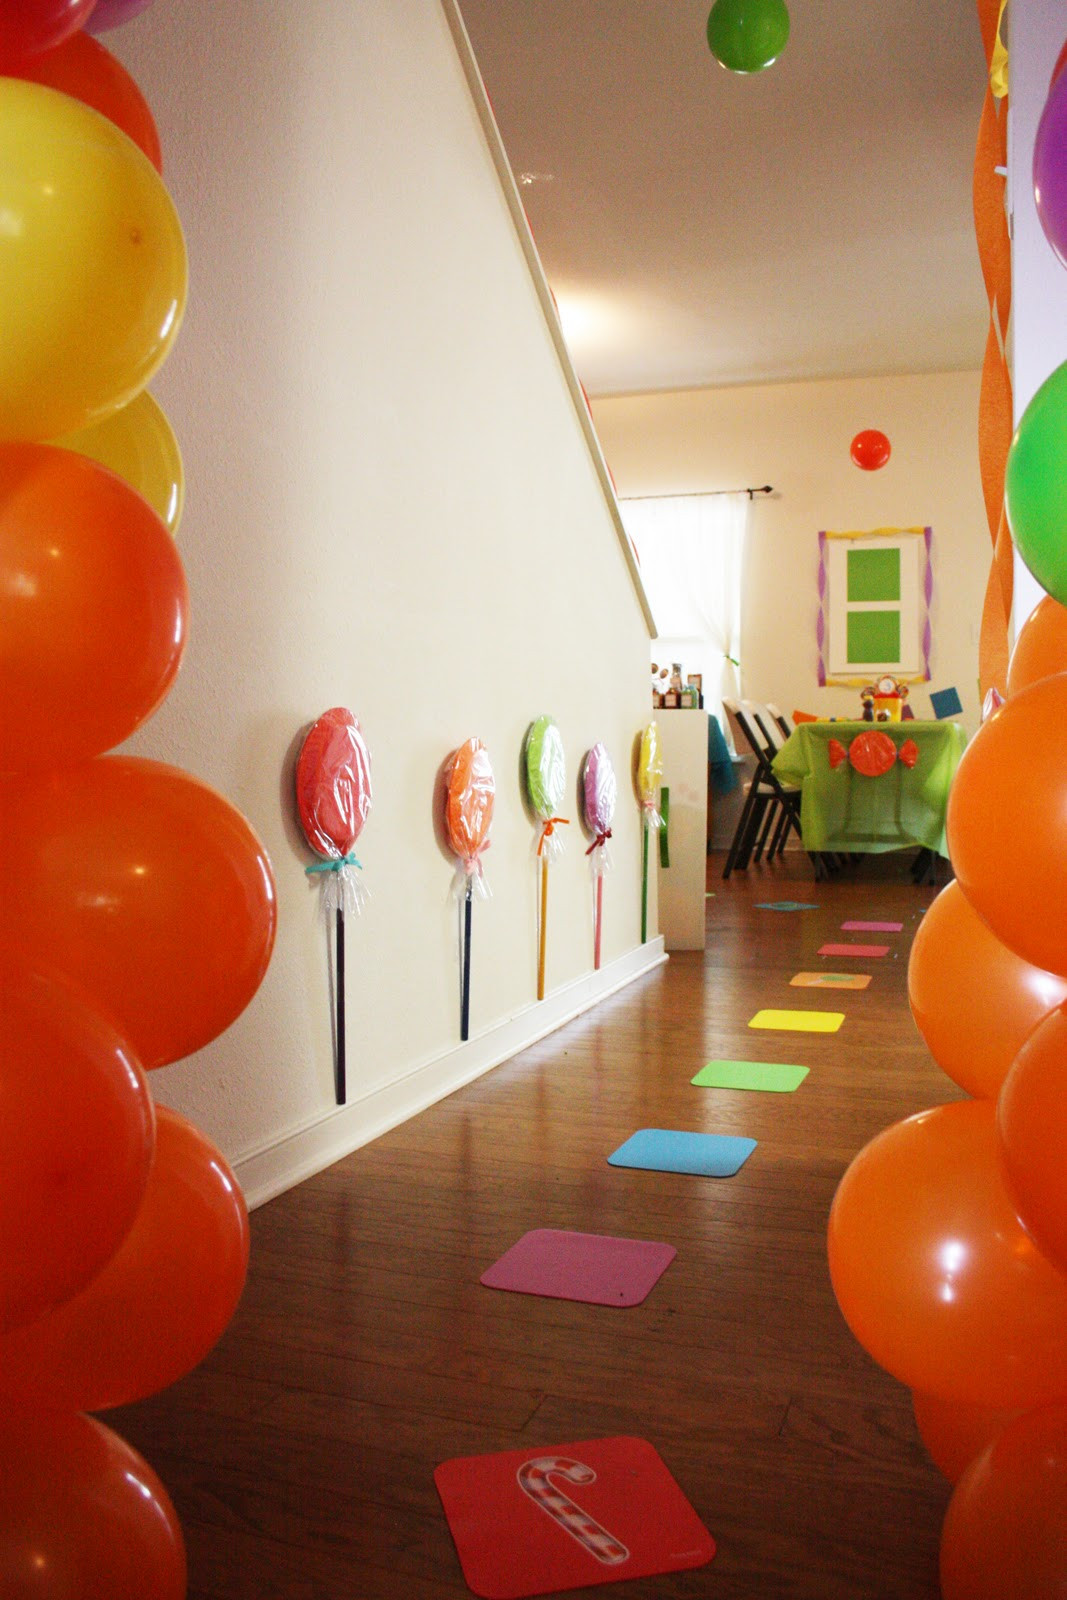 Candyland Birthday Party Ideas
 MBC Candyland Party